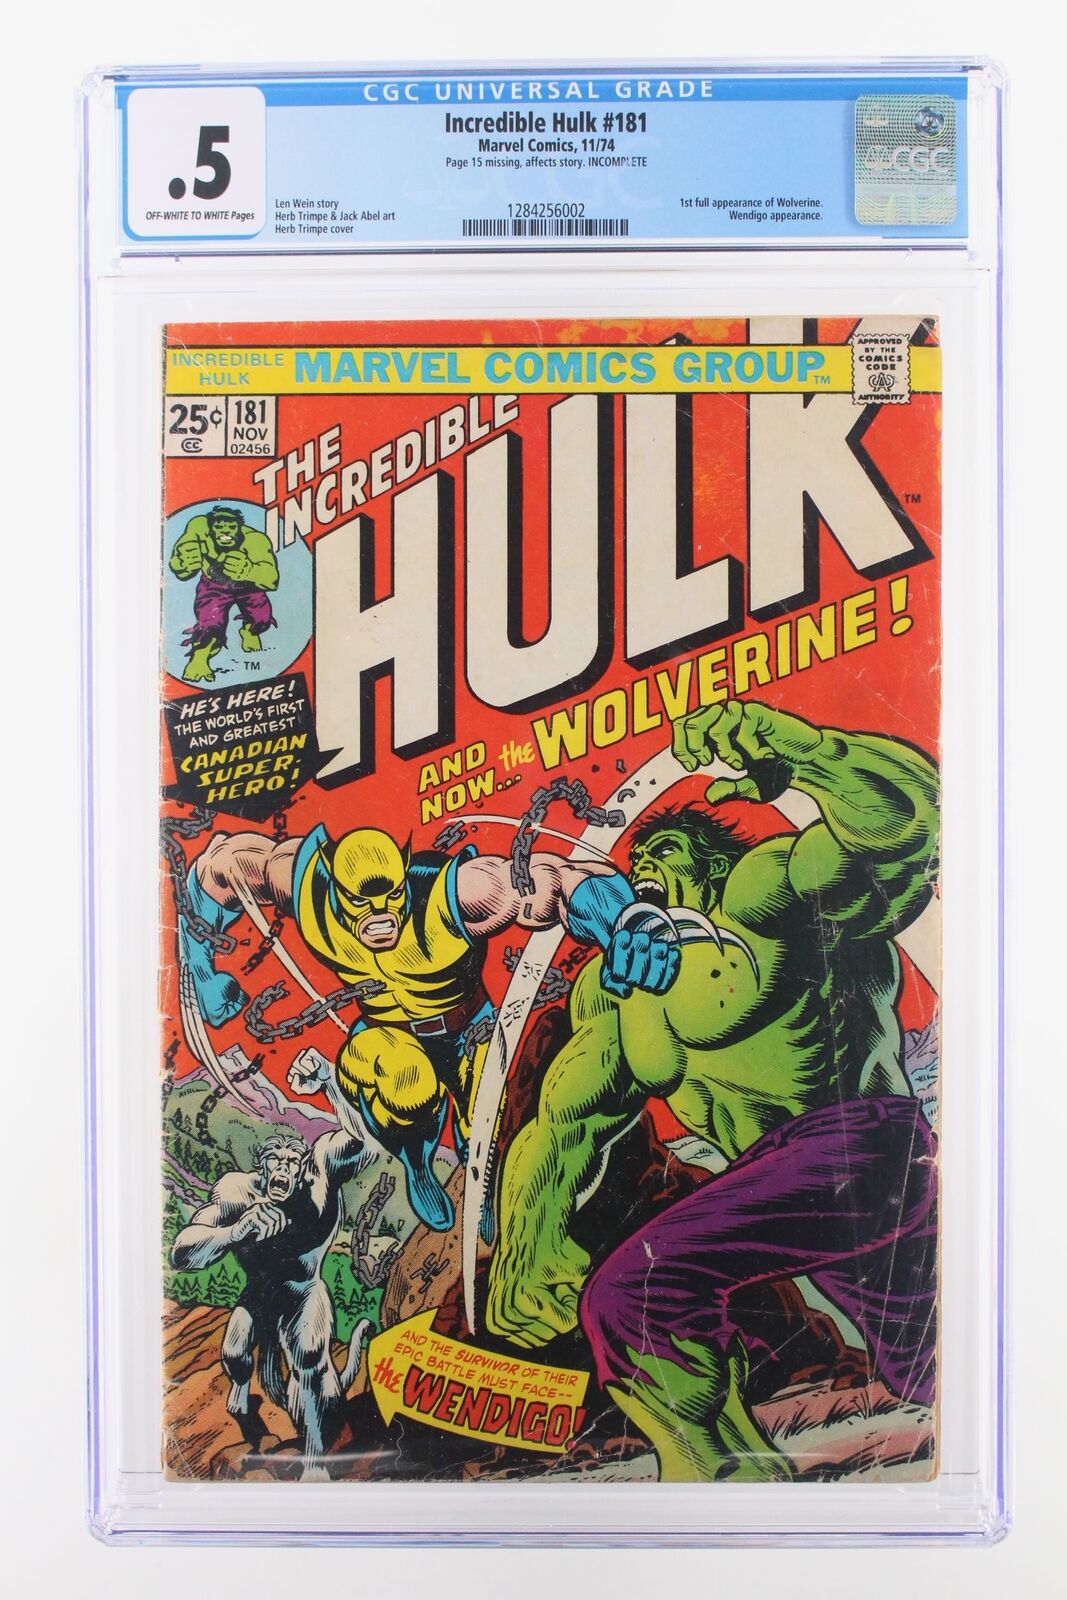 Incredible Hulk #181 - Marvel Comics 1974 CGC .5 1st full appearance of Wolverin